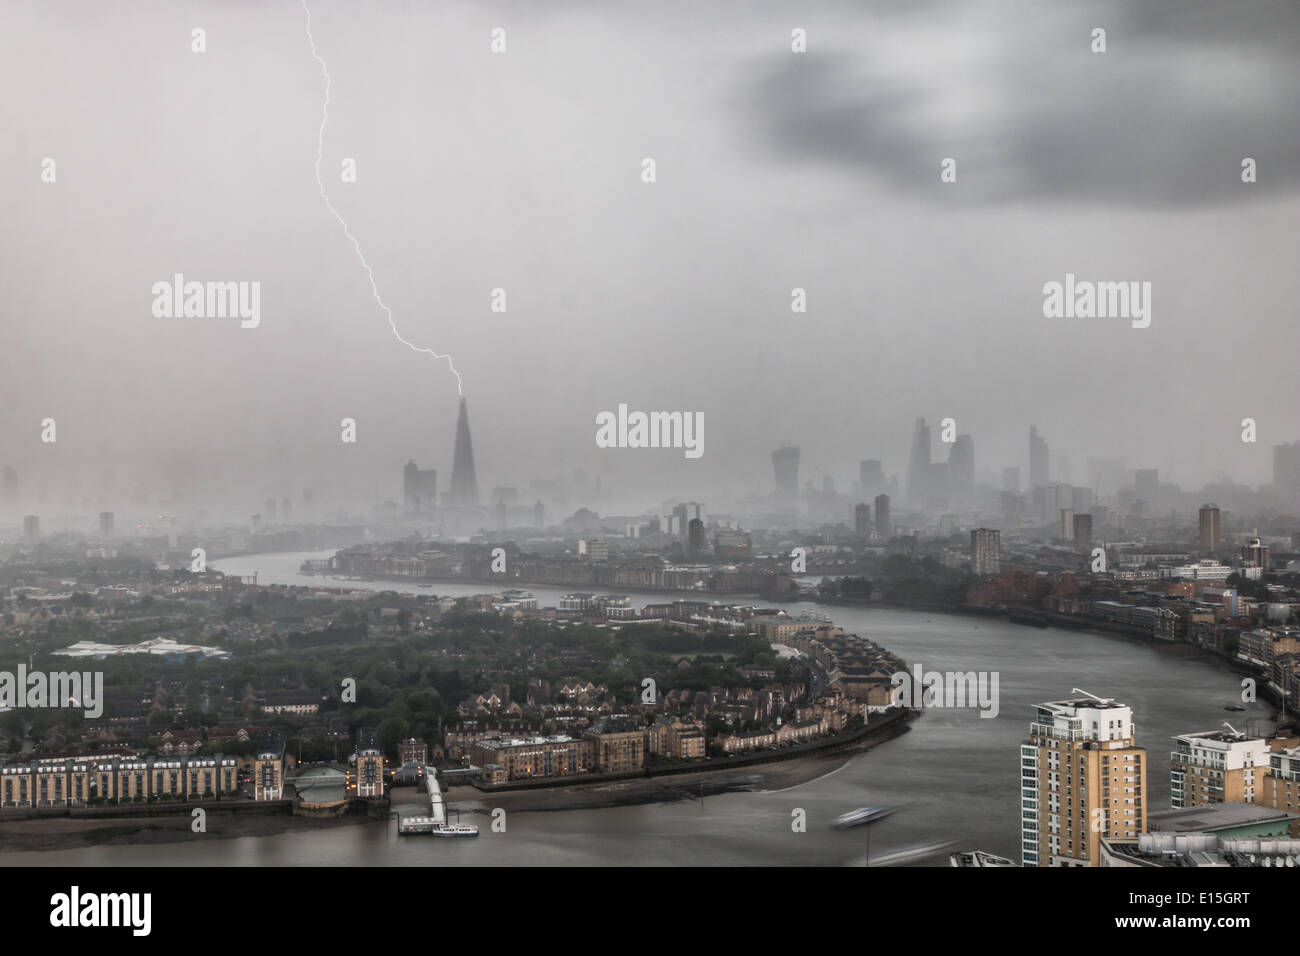 London, UK. 22nd May, 2014. Seen from the Canary Wharf financial district, a bolt of lightning strikes The Shard as a thunderstorm passes through the capital. At 310m tall, The Shard is western Europe's tallest building. Credit:  Steve Bright/Alamy Live News Stock Photo